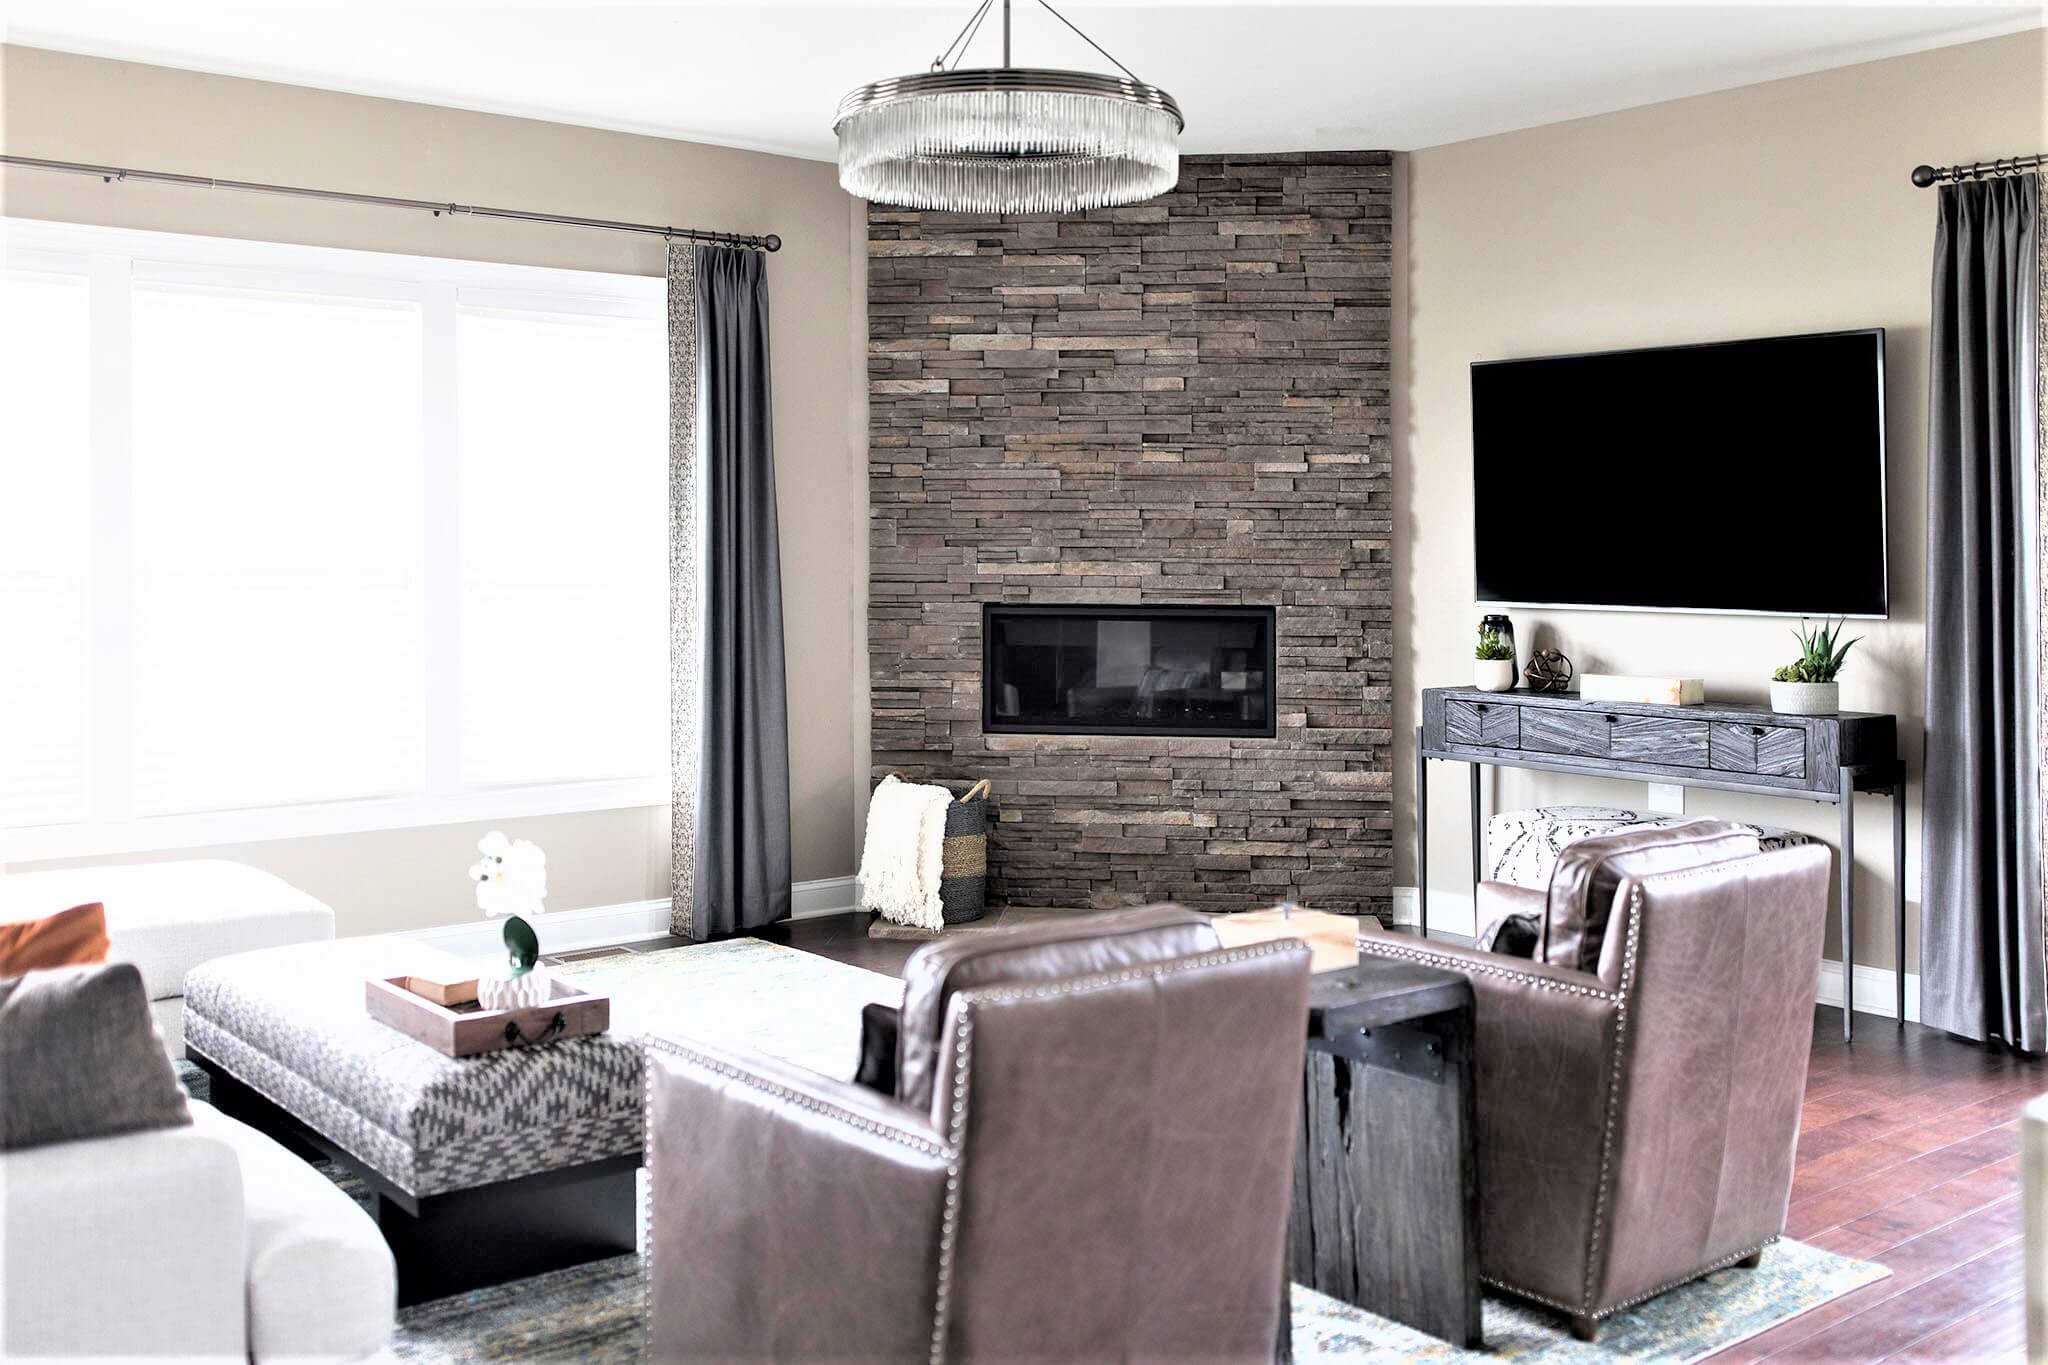 Client's floor-to-ceiling stacked stone Fireplace After in Family Room Space Lindsey Putzier Design Studio